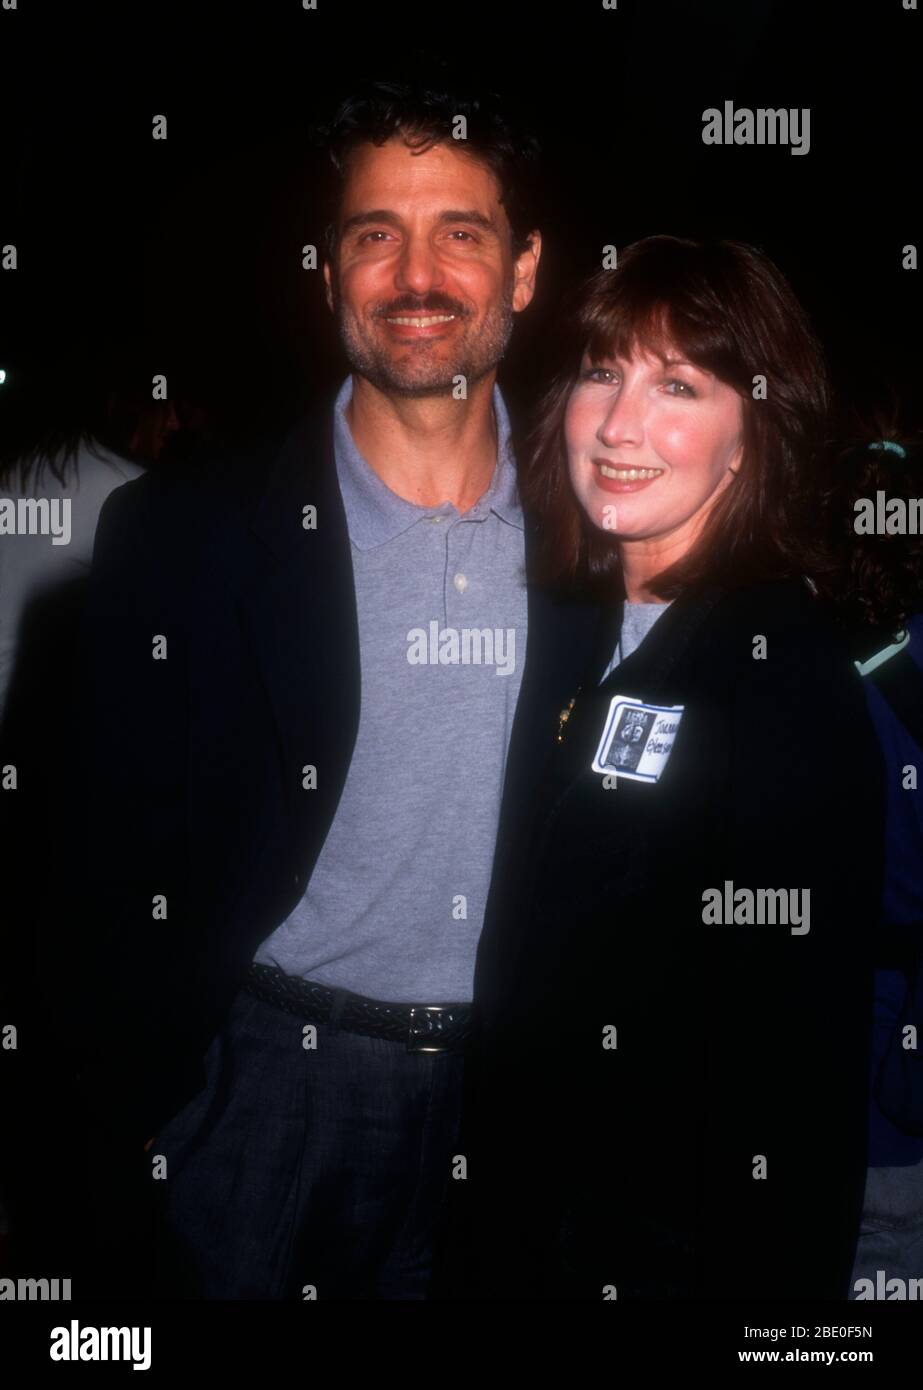 Santa Monica, California, USA 14th September 1995 Actor Chris Sarandon and wife actress Joanna Gleason attend Star-Studded Luncheon to Launch 'The Outer Limits' in Syndication on September 14, 1995 at MGM Plaza in Santa Monica, California, USA. Photo by Barry King/Alamy Stock Photo Stock Photo